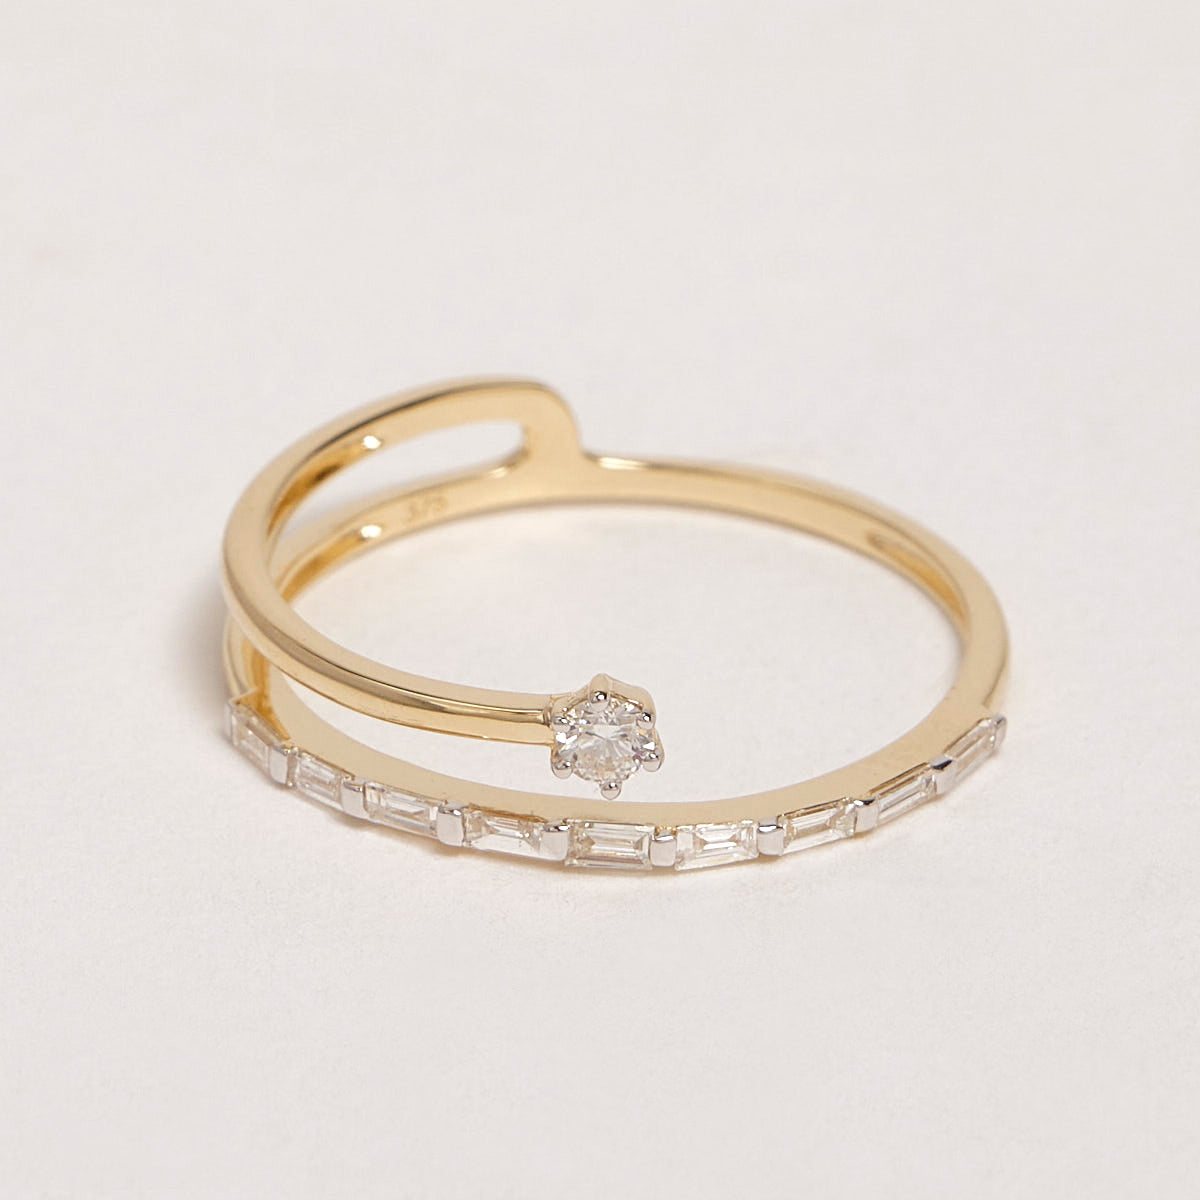 Giselle 9ct Yellow Gold Diamond Duo Ring